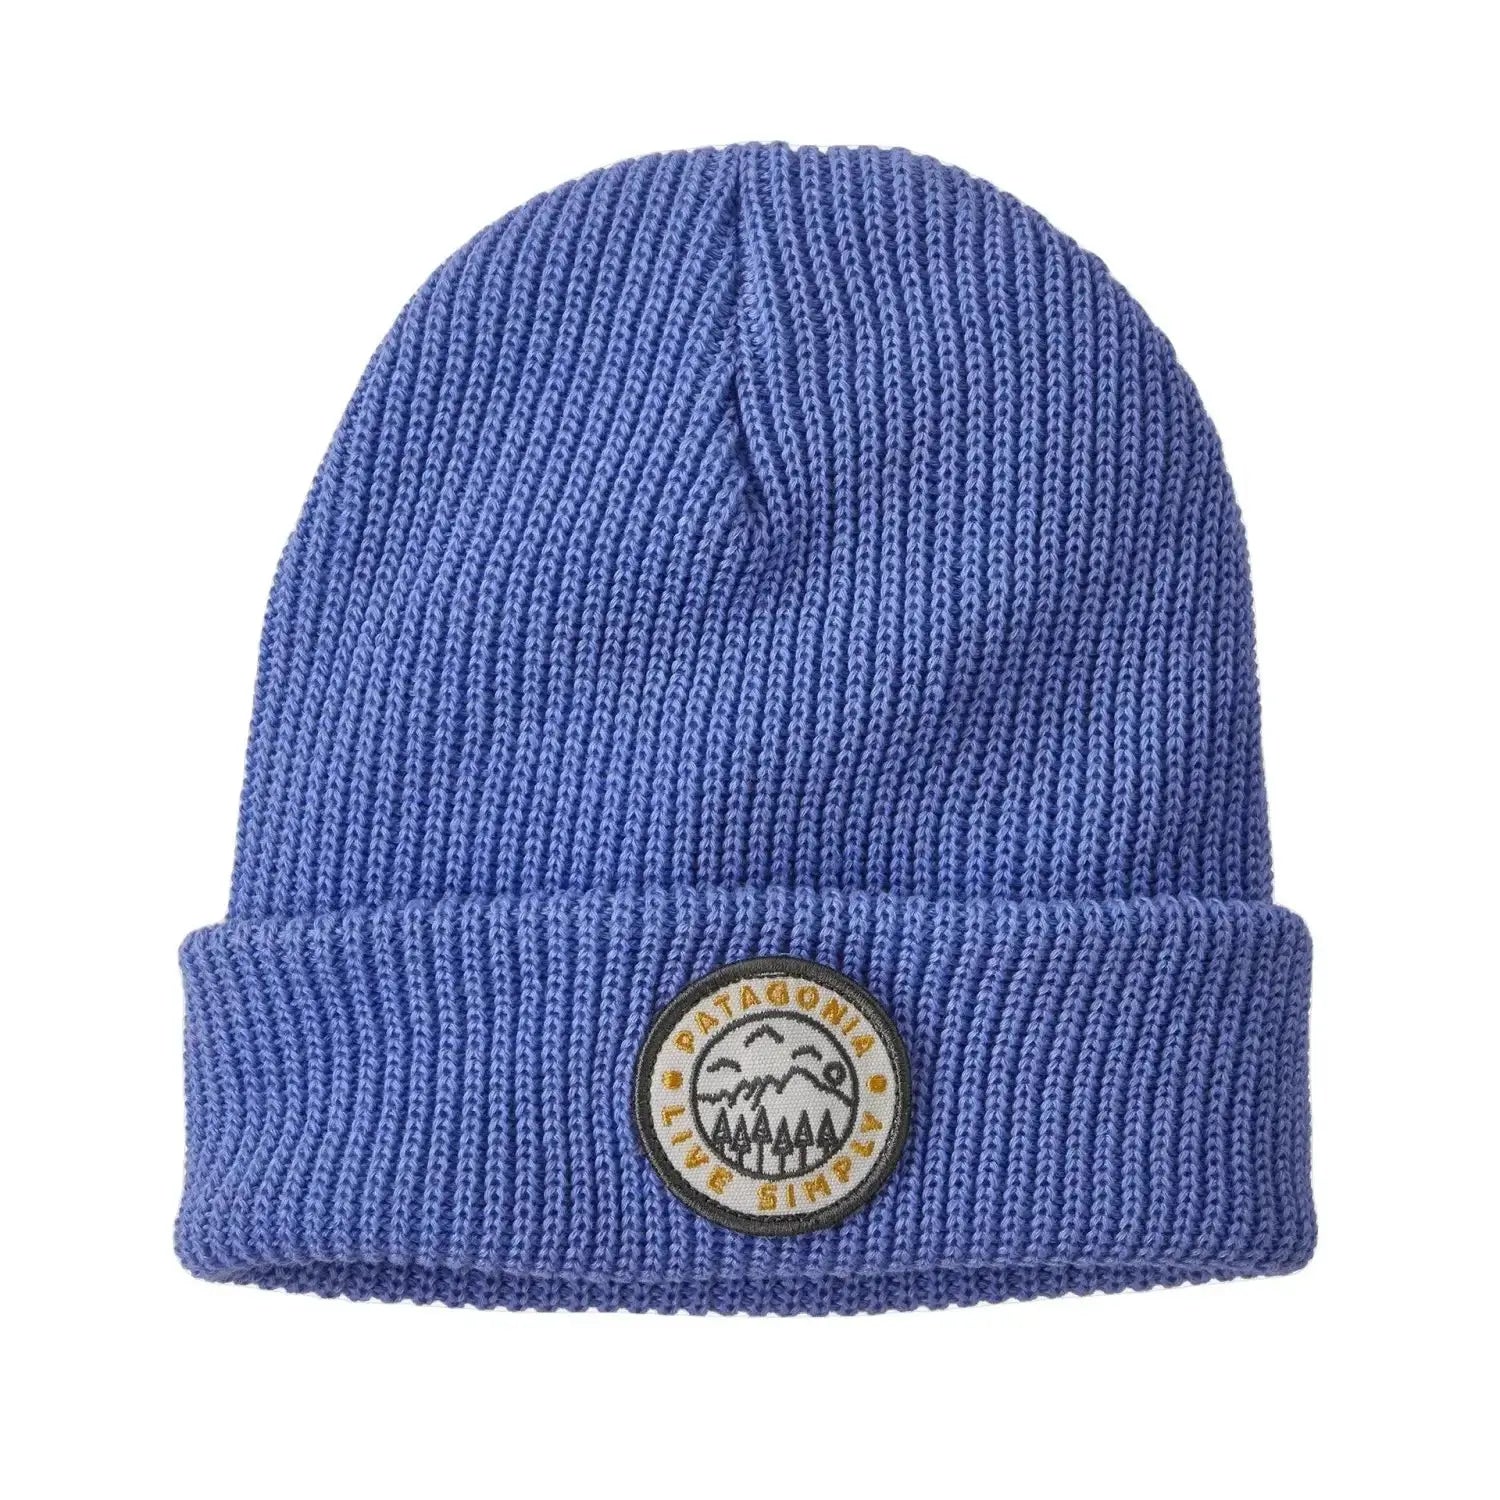 Patagonia K's Logo Beanie, Live Simply Periwinkle, front view 